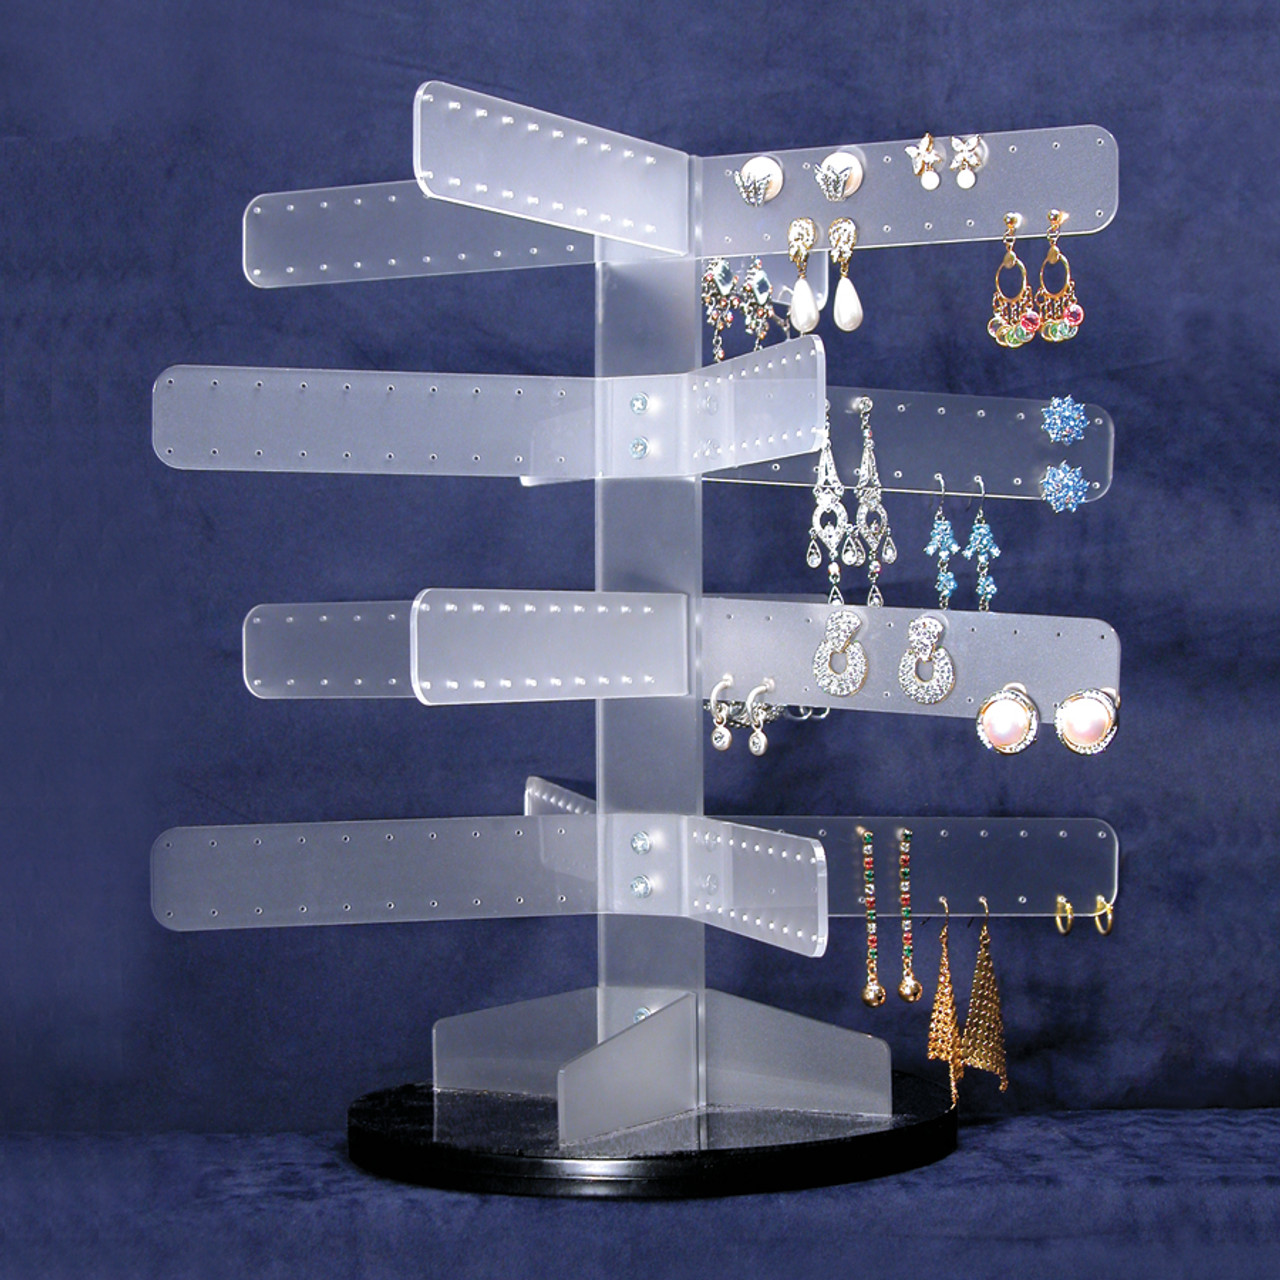 Branched out Acrylic Rotating Earring Stand - 888 Display USA, Inc.